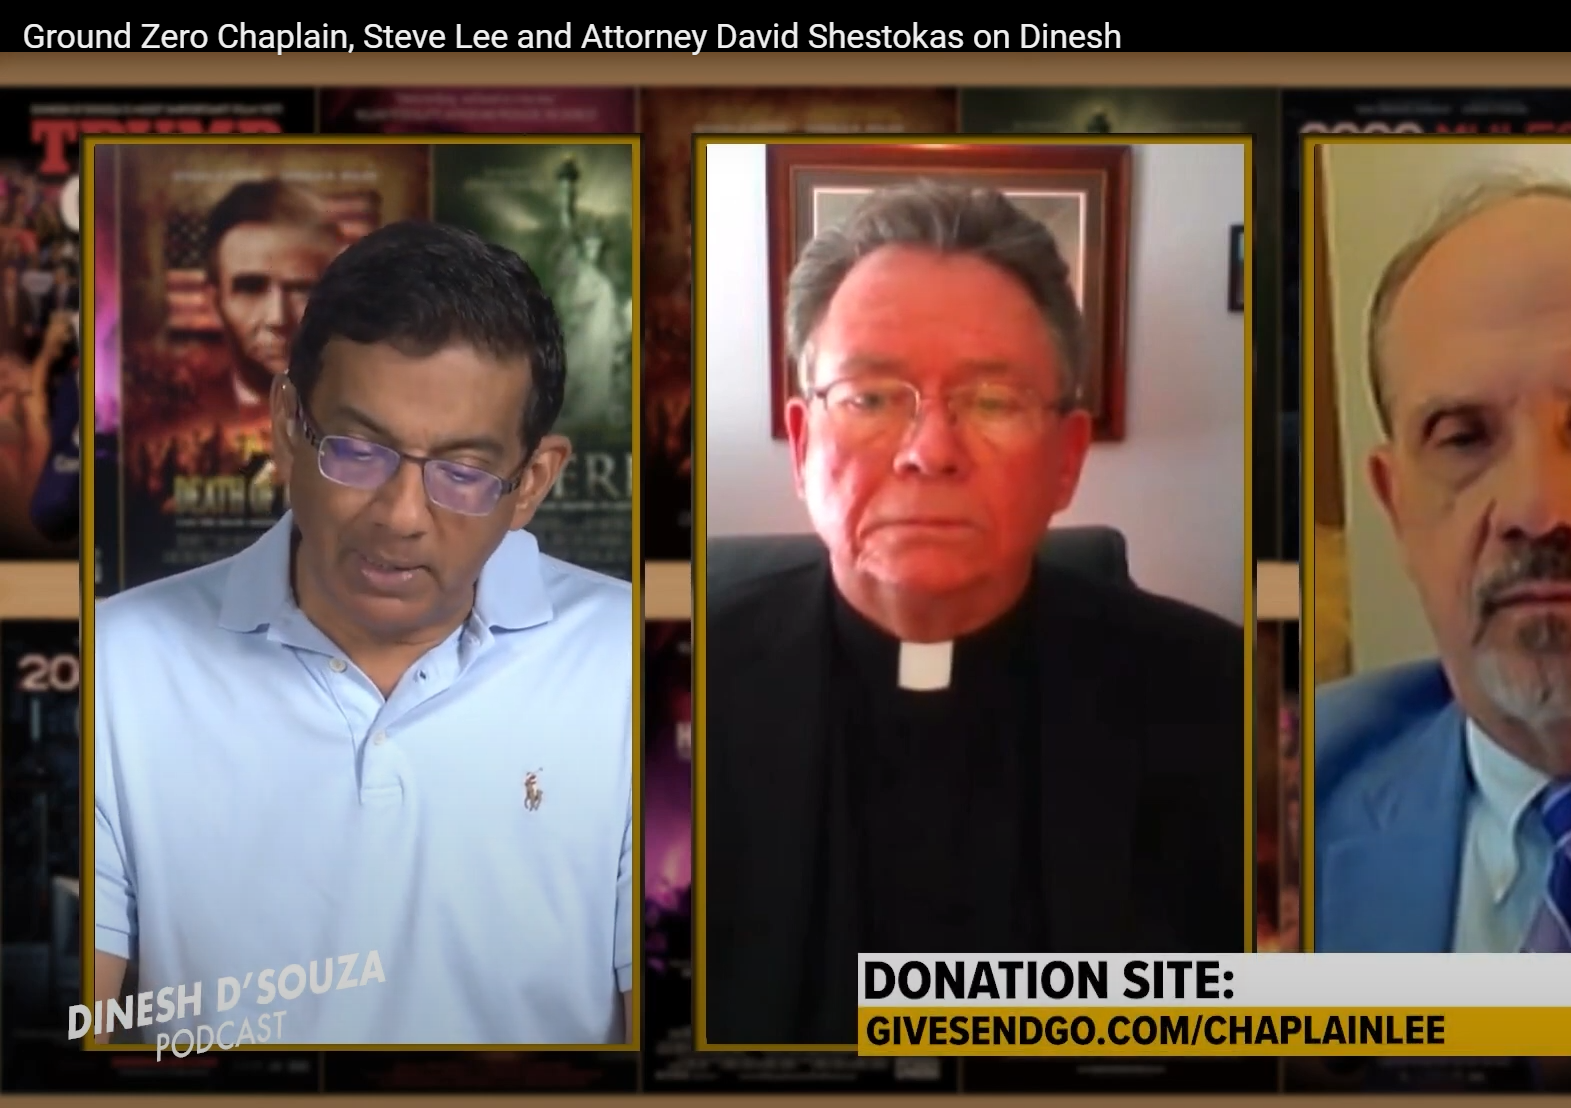 Update Dinesh D'Souza Interview of Chaplain Lee and Attorney Shestokas Image